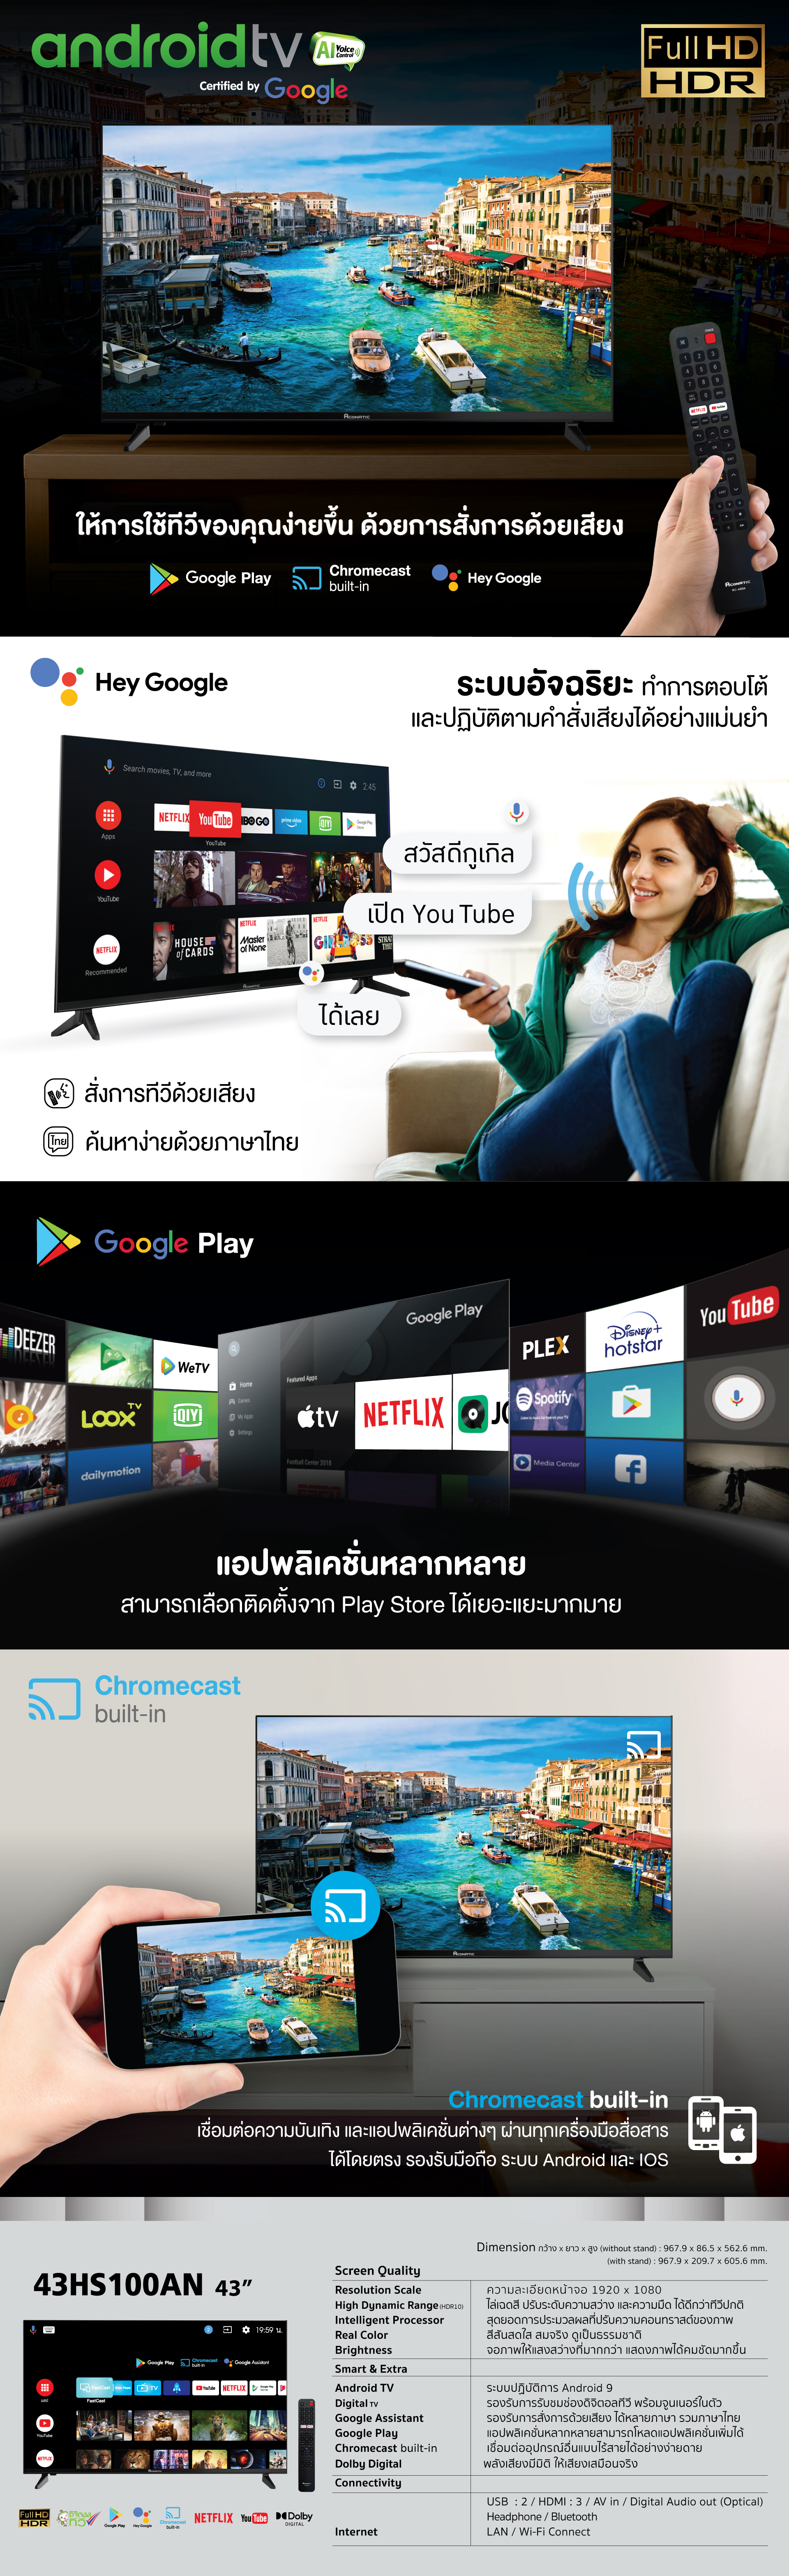 Android TV 43" model 43HS100AN